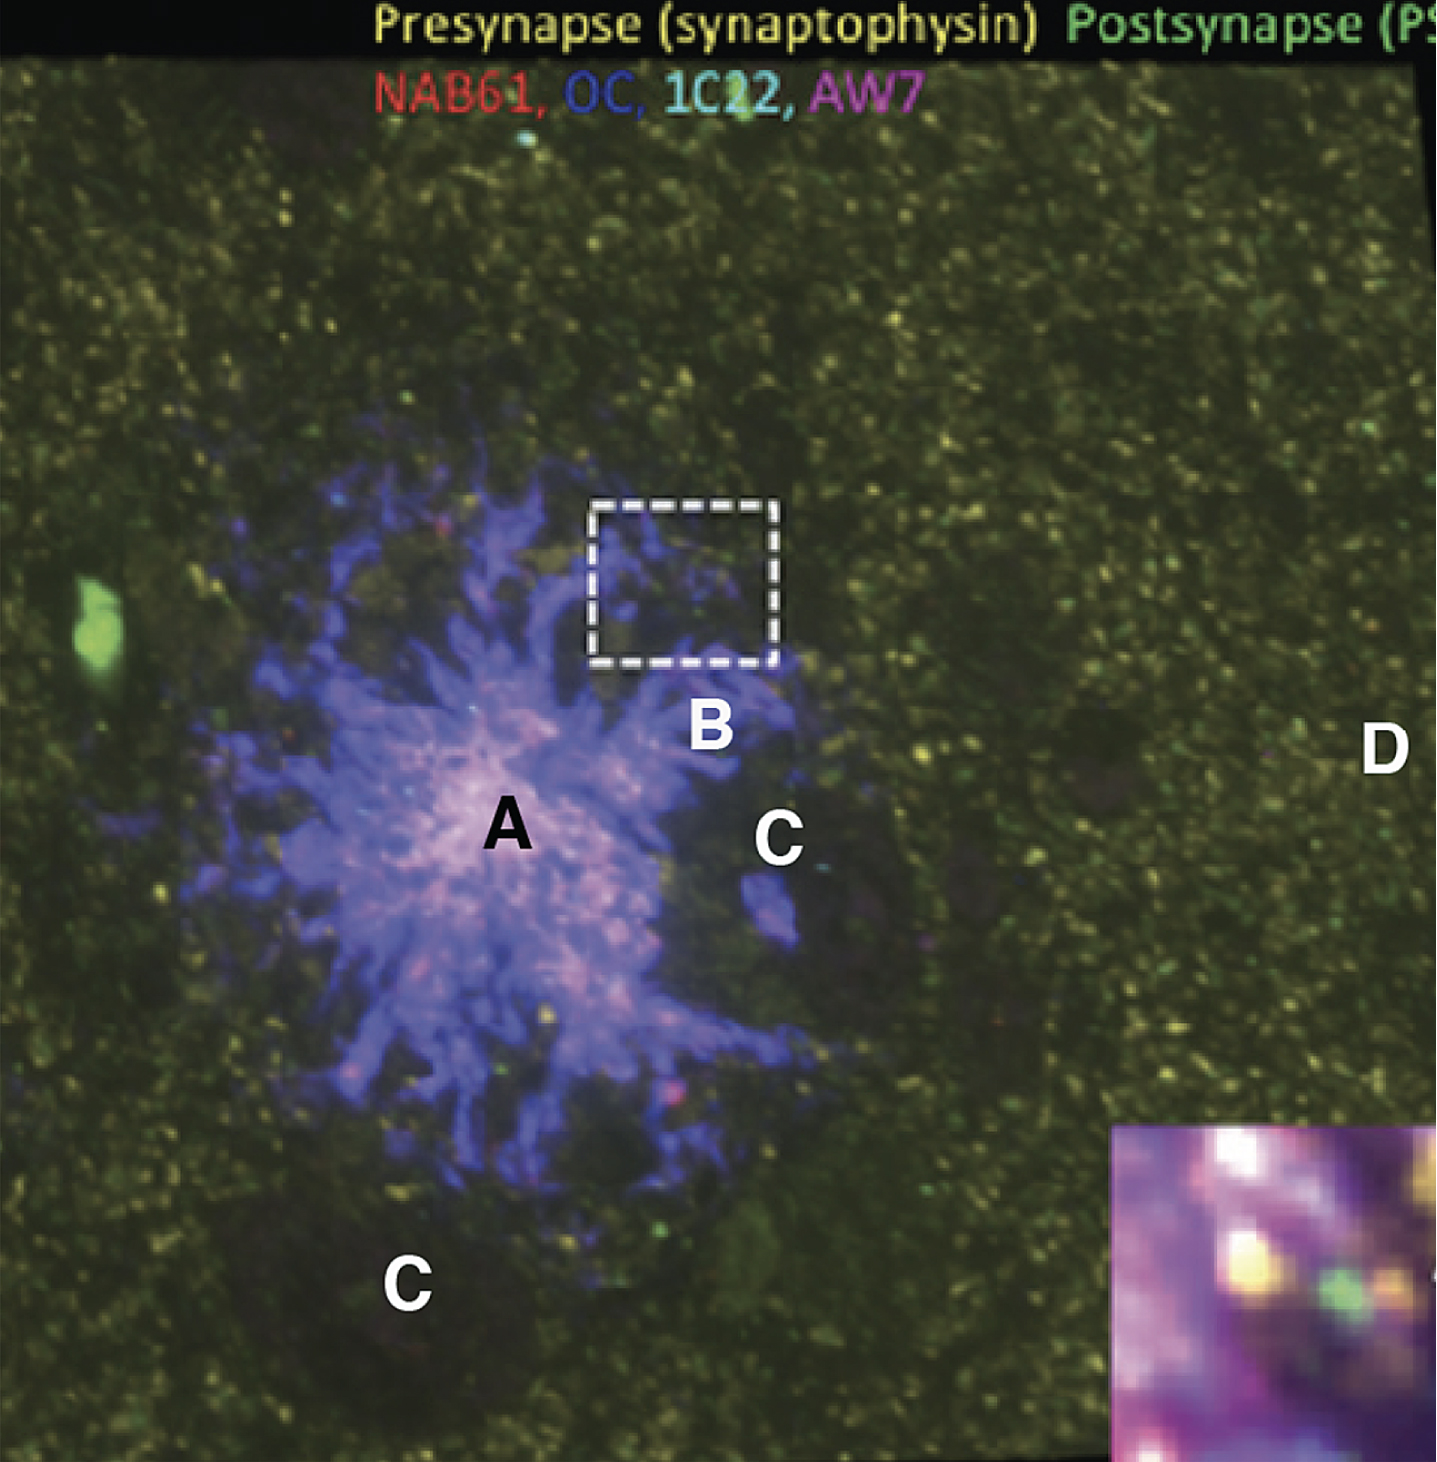 Array tomography staining of brain tissue showing the presence of Aβ (red, deep blue, light blue, purple antibody stains) and pre- (yellow) and postsynaptic densities (green). Letters have been added to identify regions discussed in the text. Reprinted from Pickett EK et al., Non-fibrillar oligomeric amyloid-β within synapses, J Alzheimers Dis 53, 787–800, 2016, and modified with permission from authors and IOS Press.